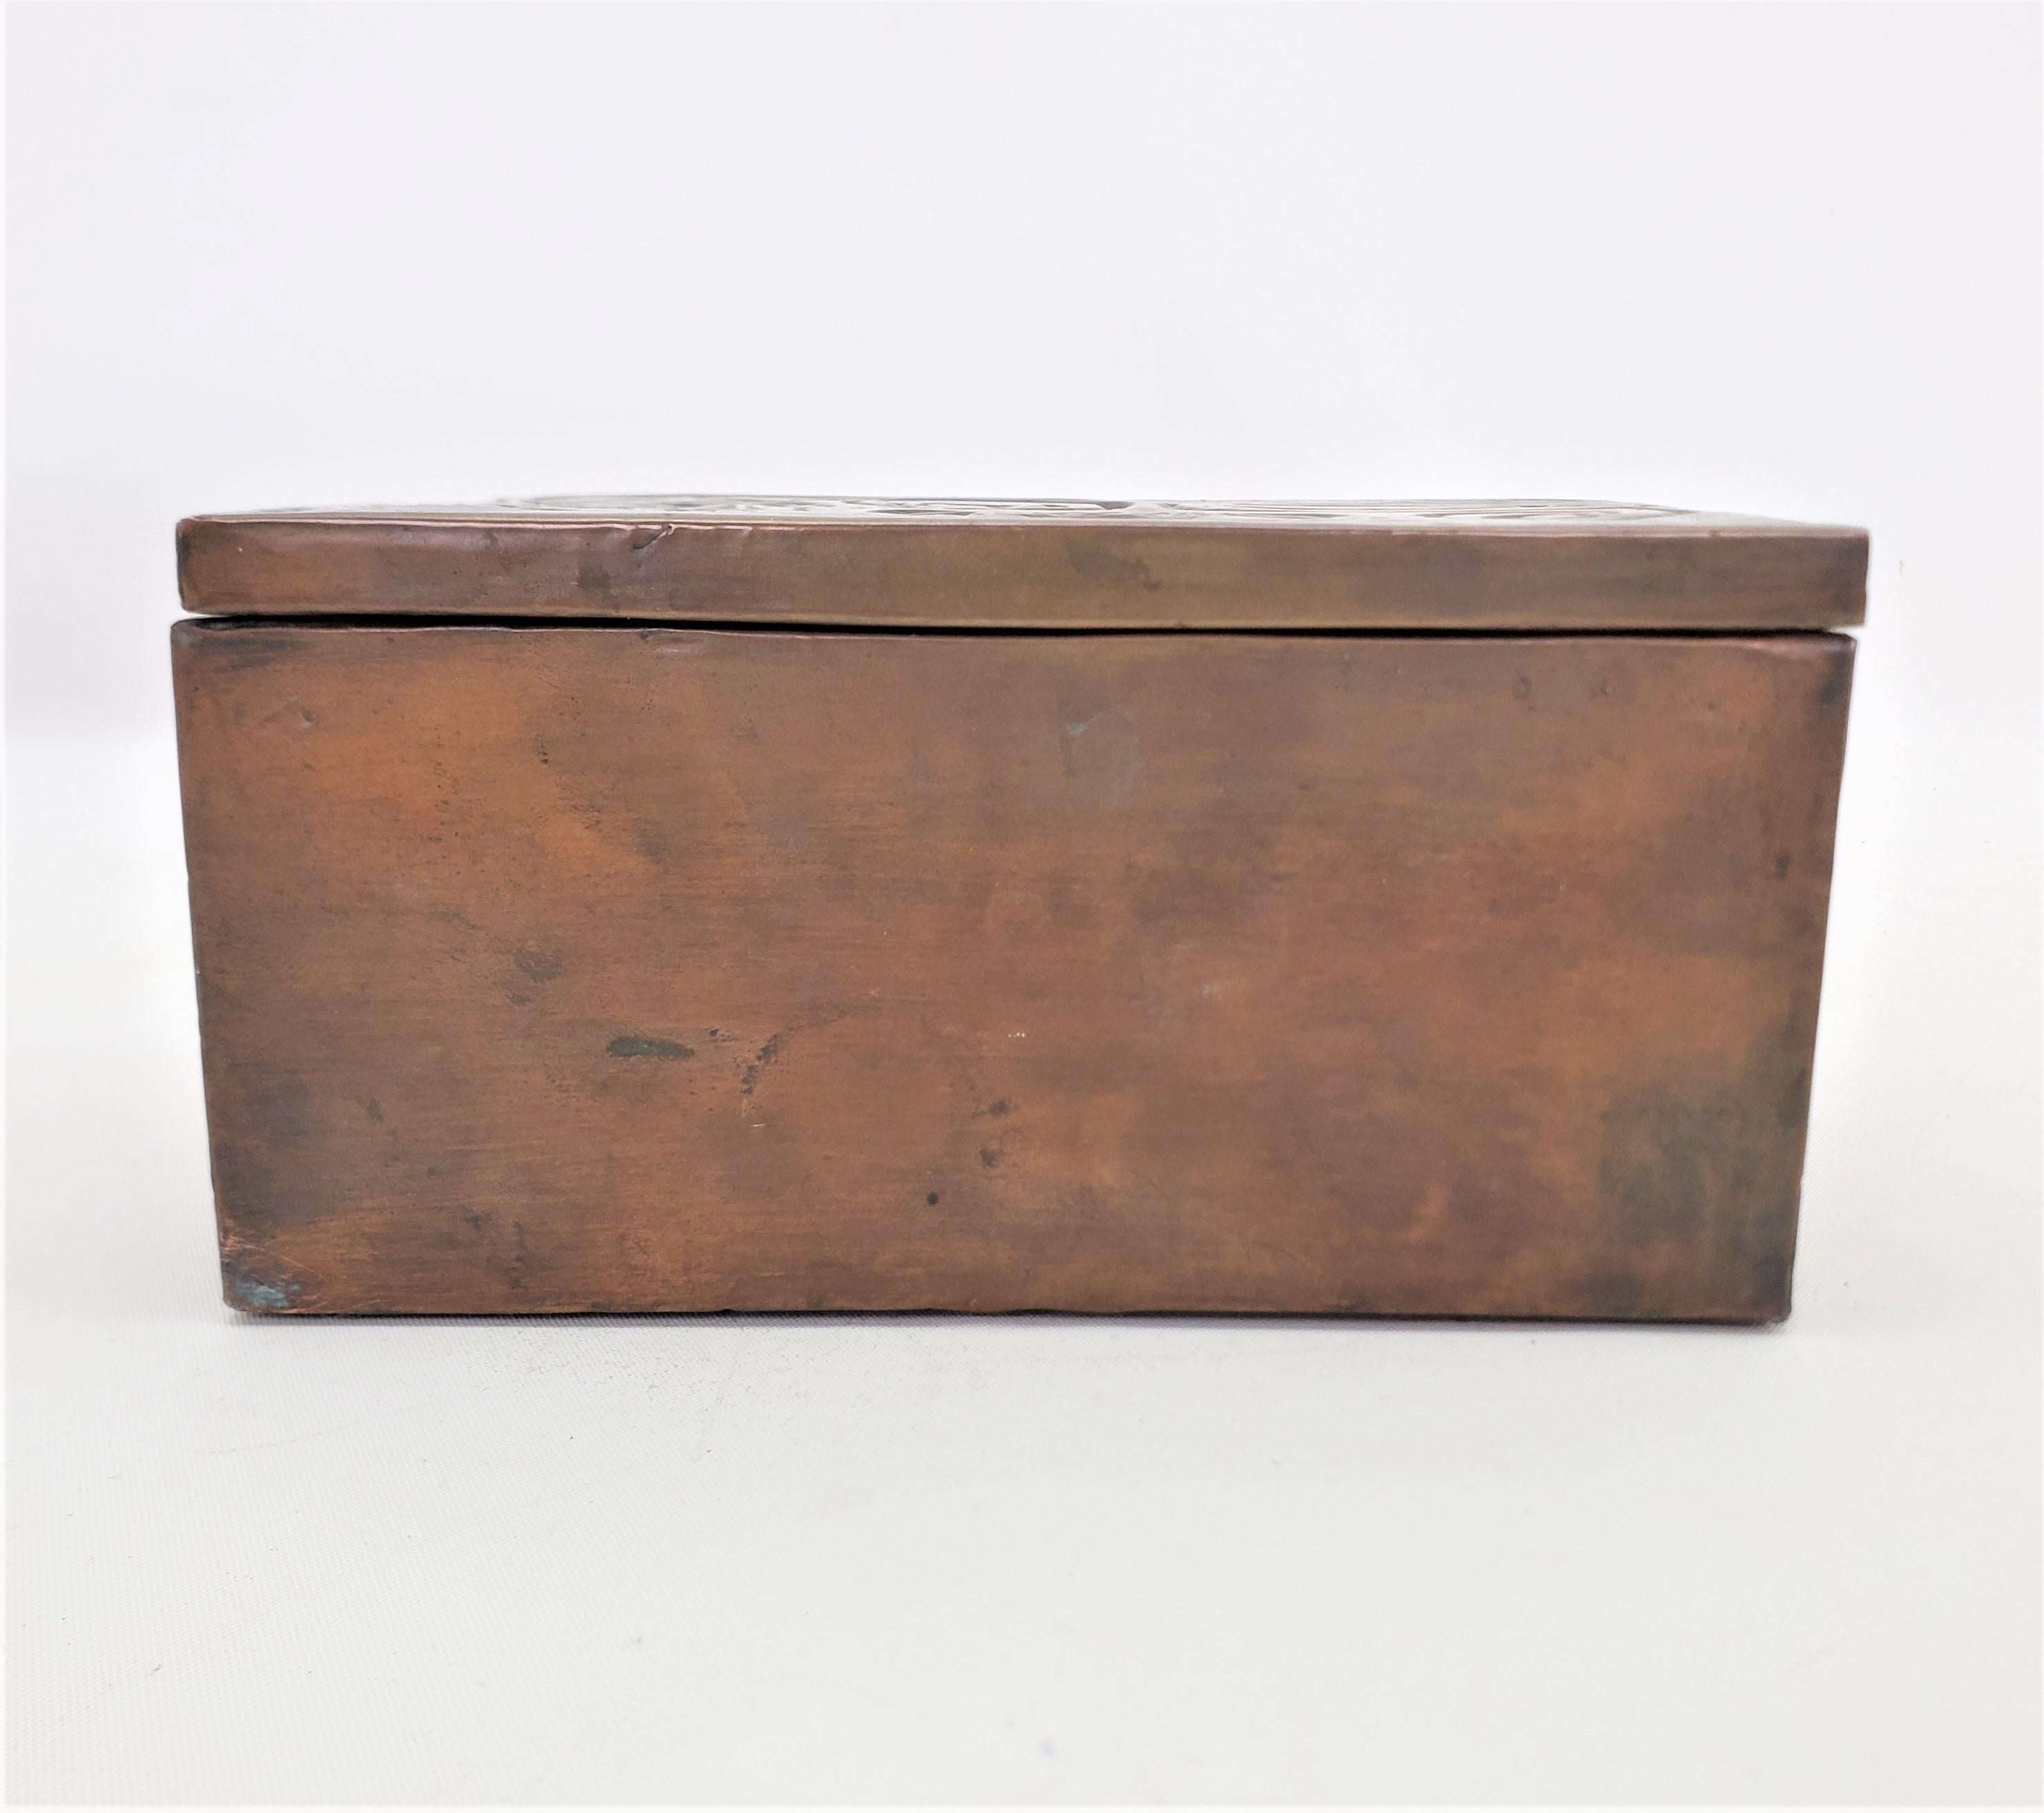 Hand-Crafted Mid-Century Era West Coast Haida Styled Copper Covered Box with Repouse Decor